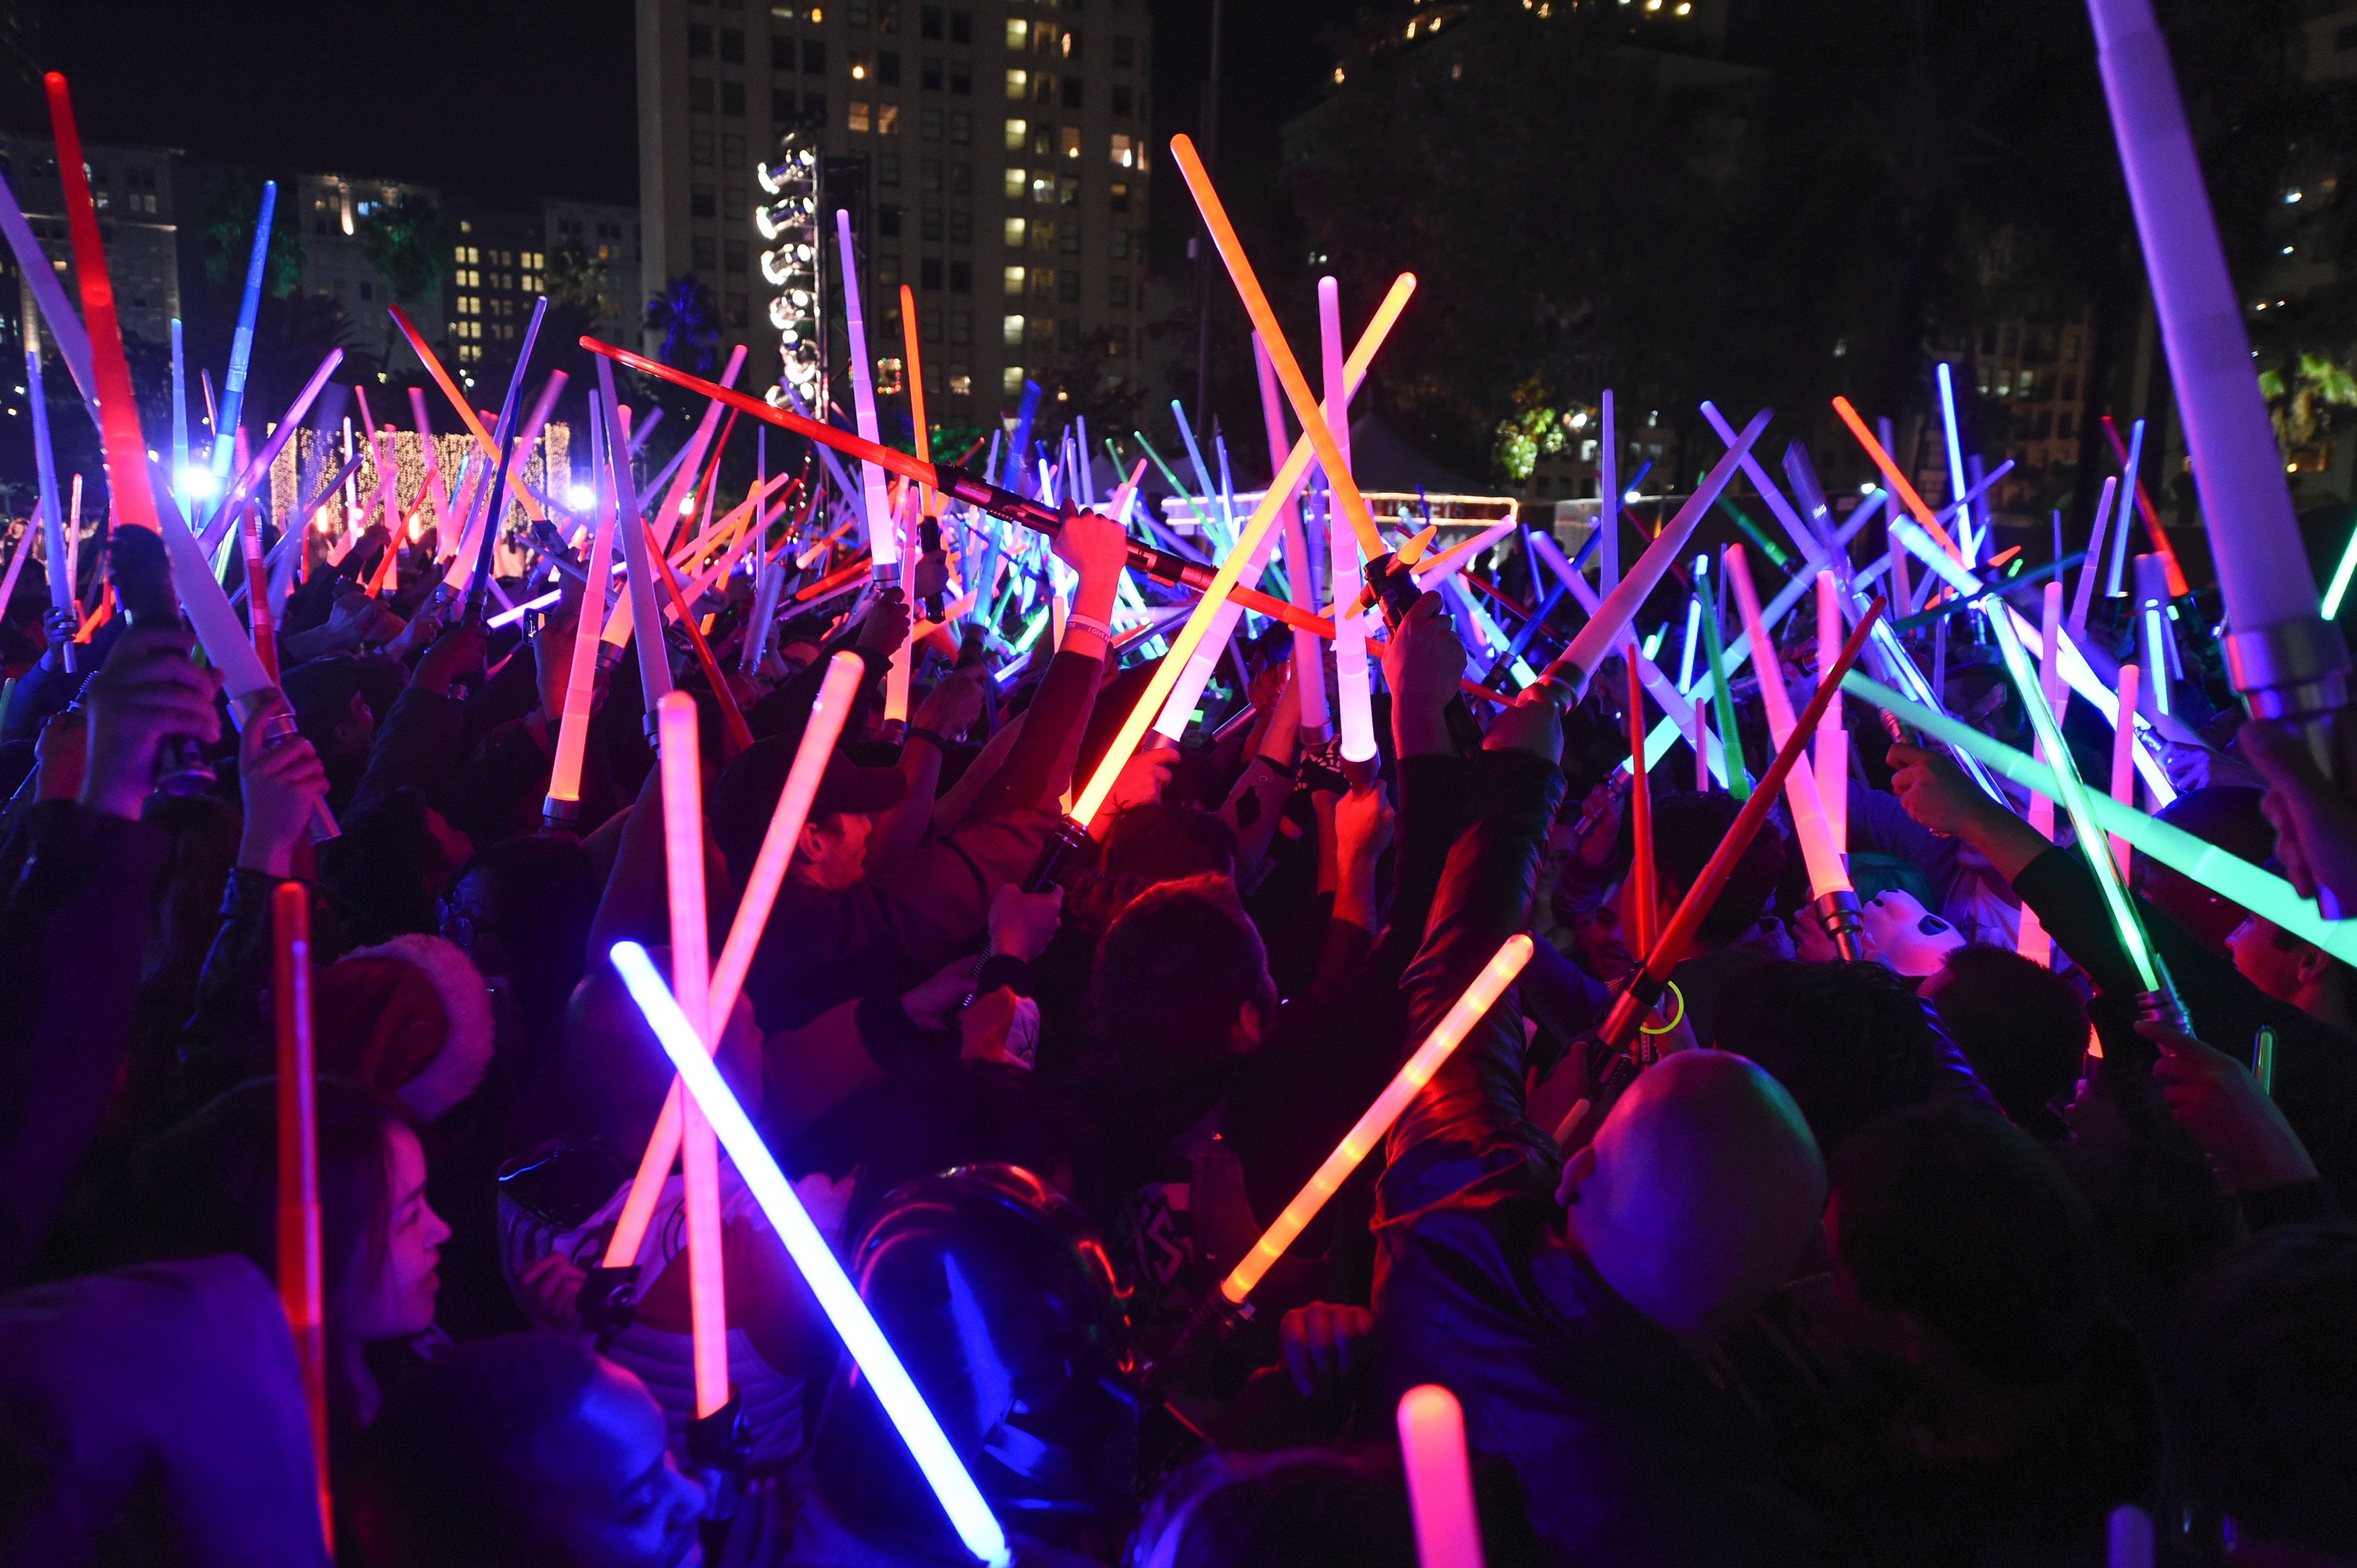 'Star Wars' fans raise their lightsabers in Pershing Square in downtown Los Angeles, Calif., on Dec. 18, 2015. (Robyn Beck—AFP/Getty Images)